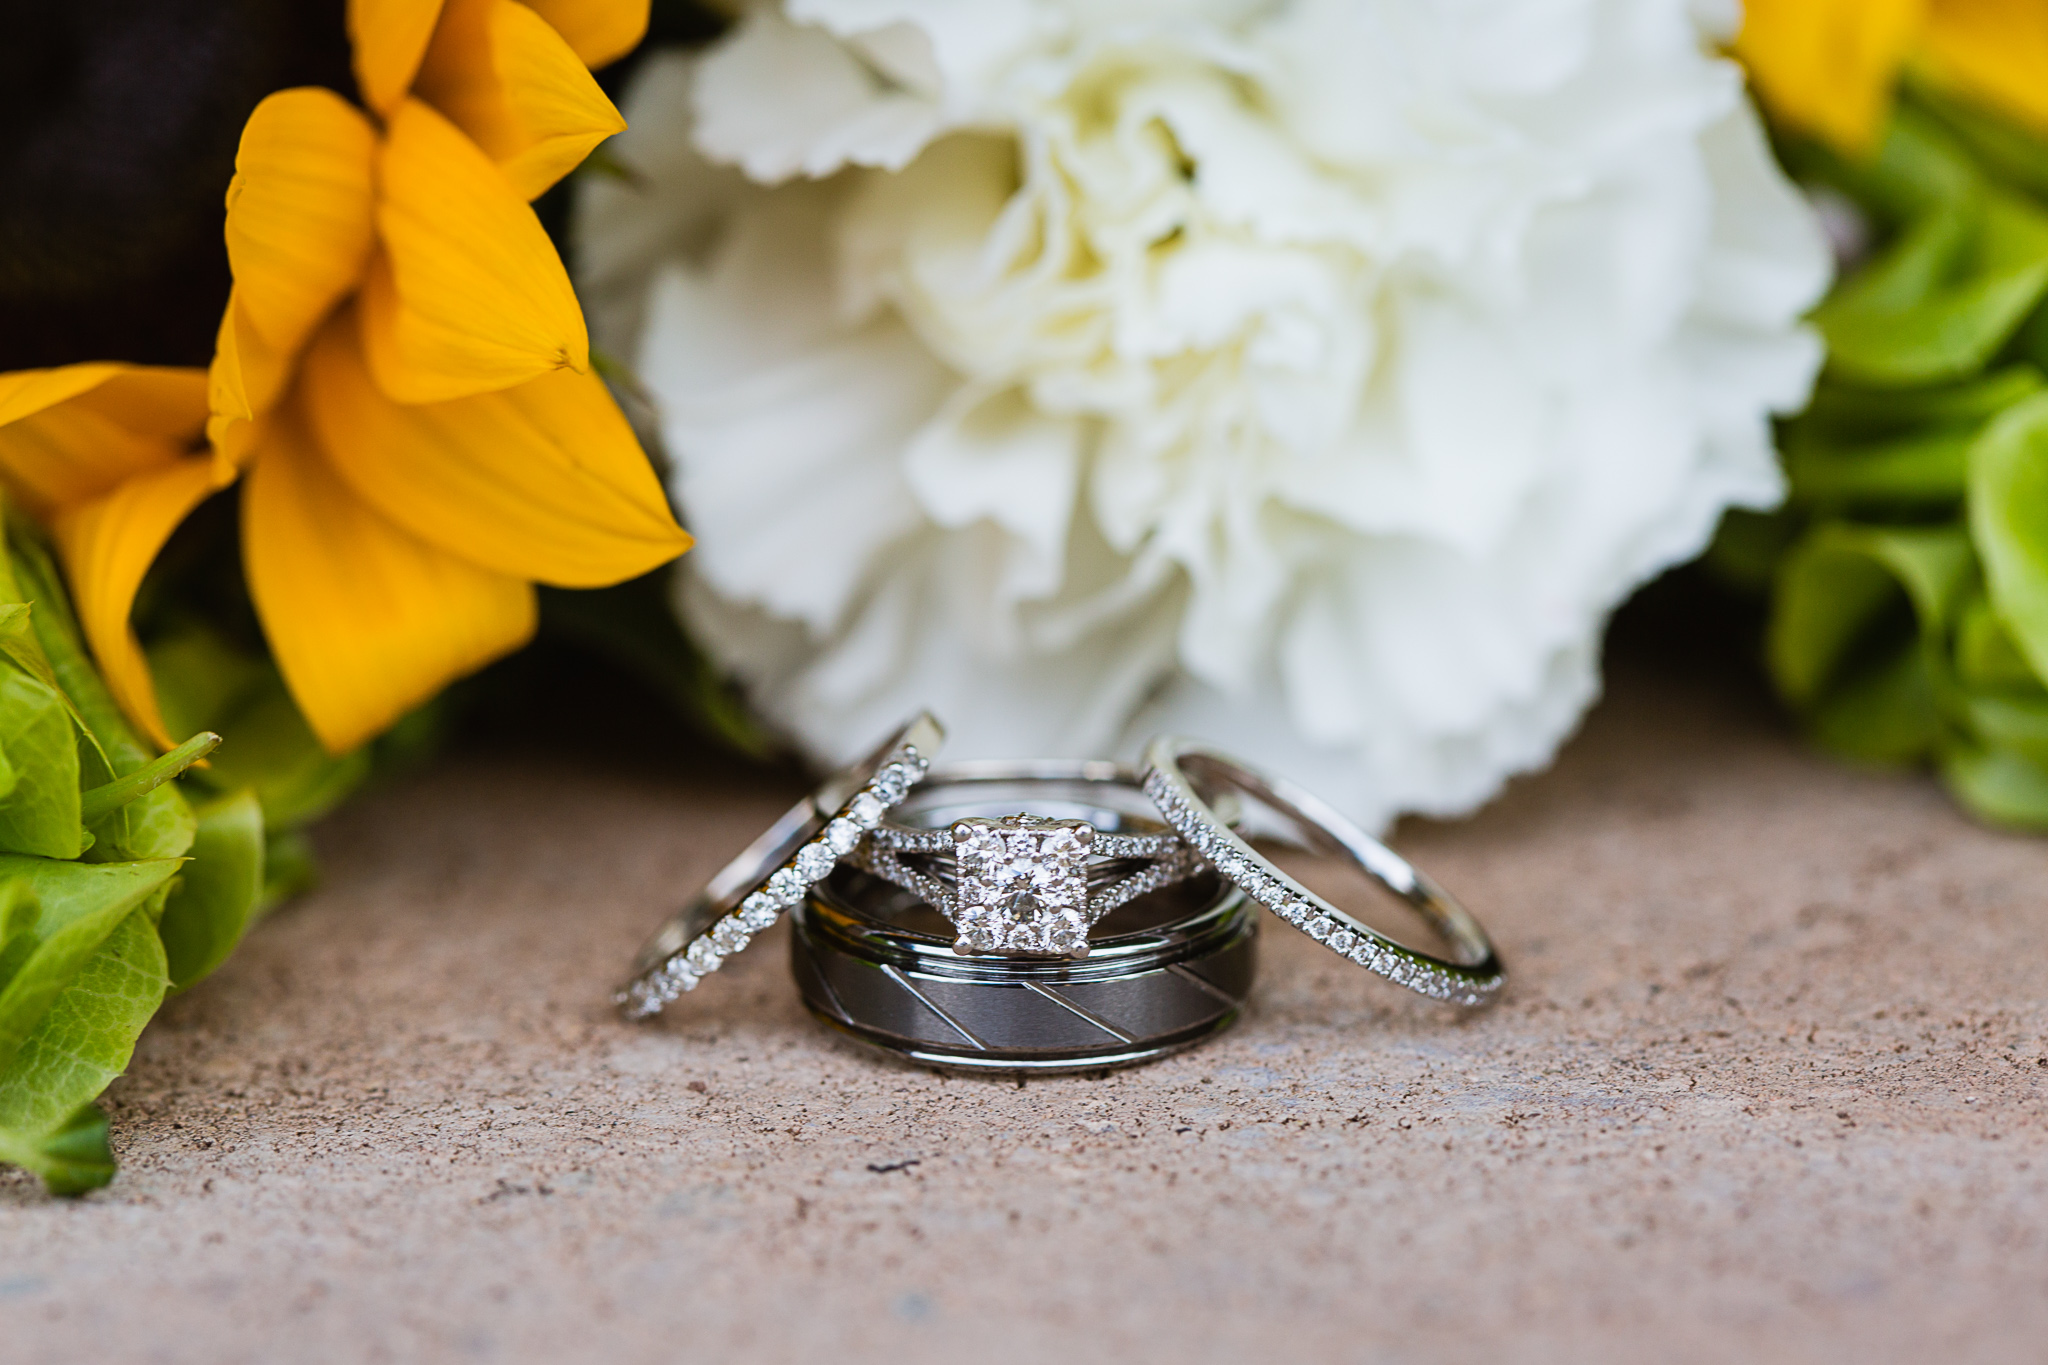 Detail image of wedding rings in front of bouquet at backyard garden wedding by Phoenix wedding photographer PMA Photography.